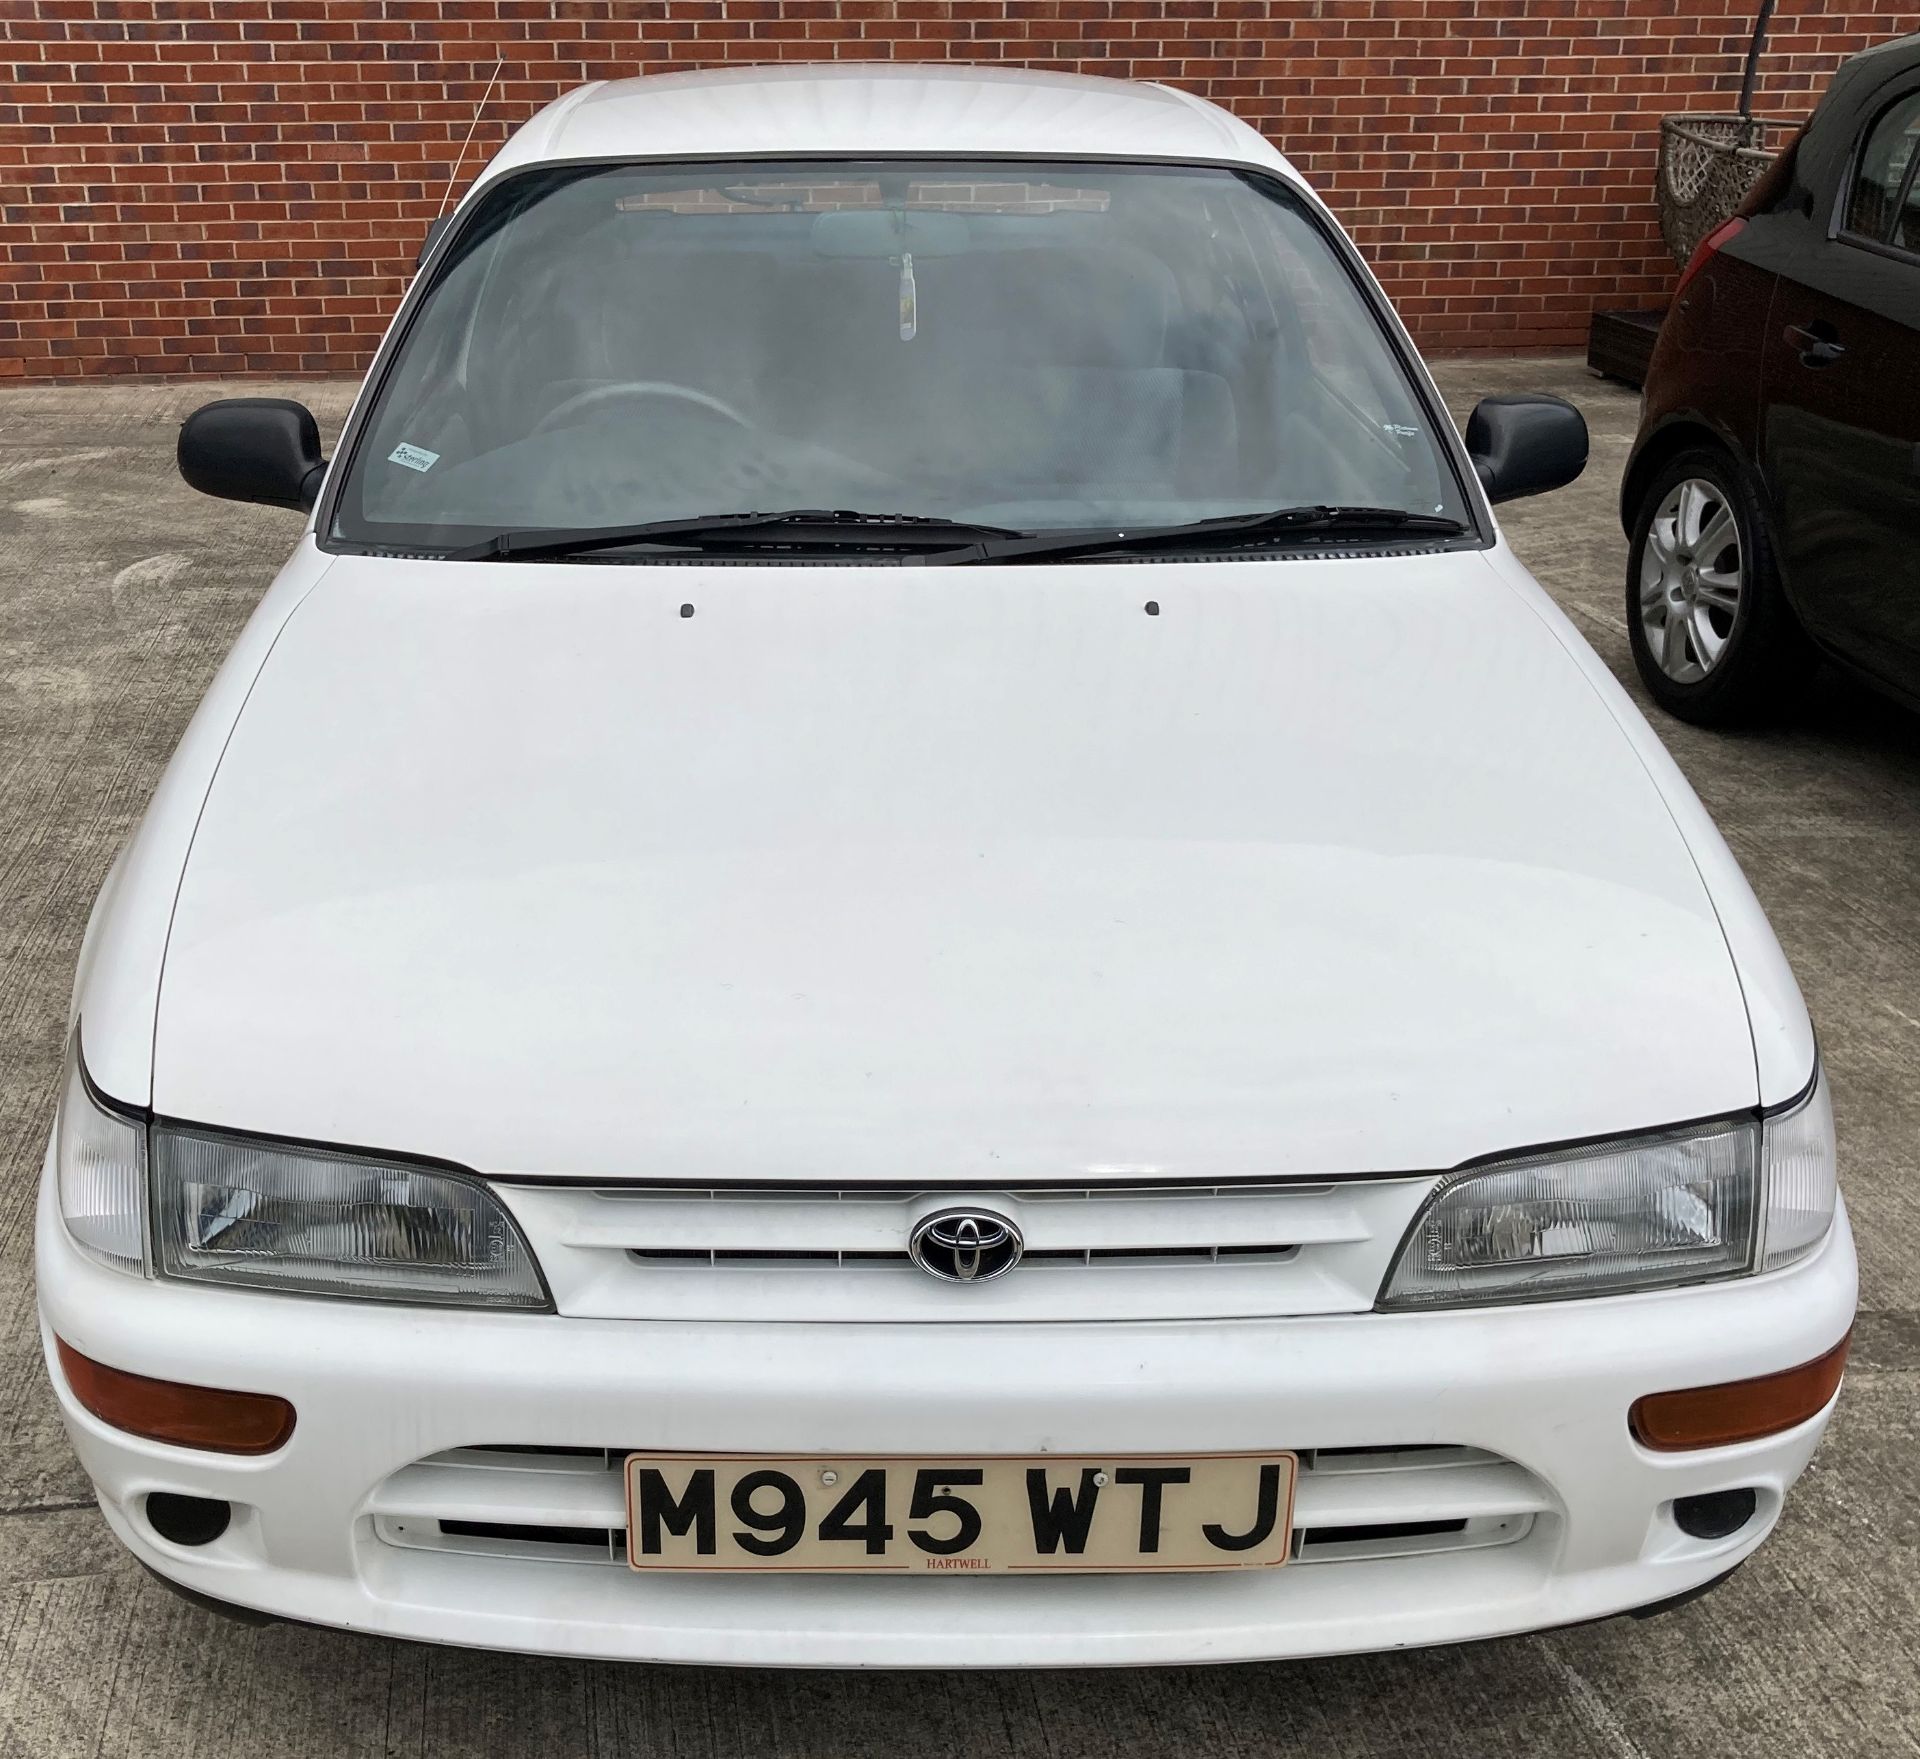 ON INSTRUCTIONS OF A RETAINED CLIENT TOYOTA COROLLA KUDOS PLUS 1331cc 3 door hatchback - petrol - - Image 10 of 18